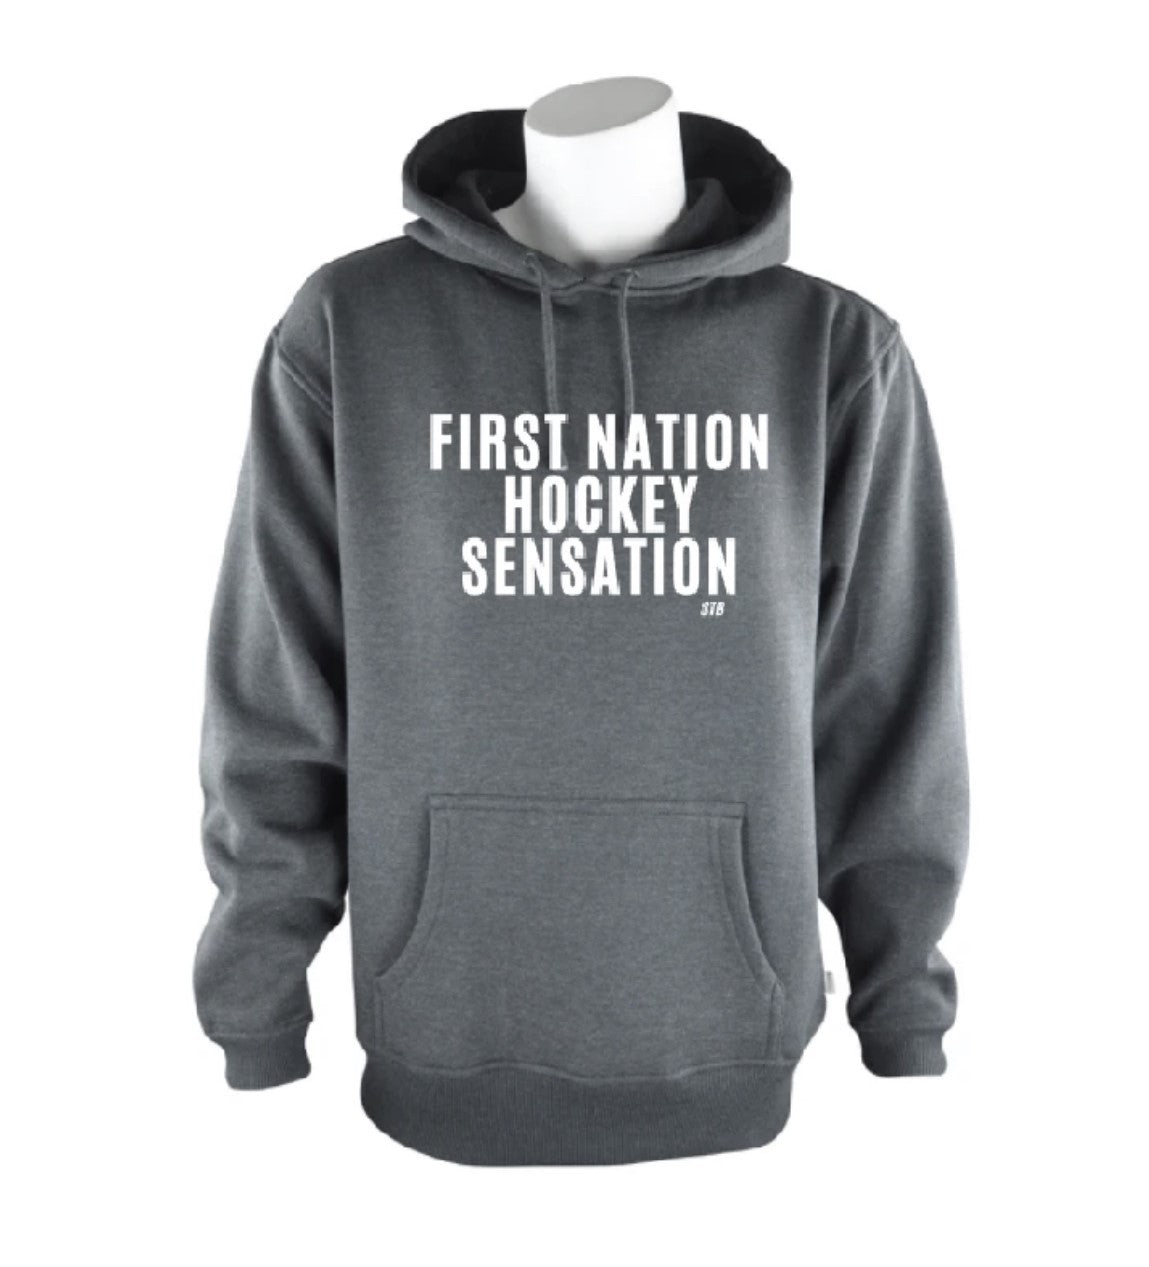 First Nation Hockey Sensation Hoodie - Youth